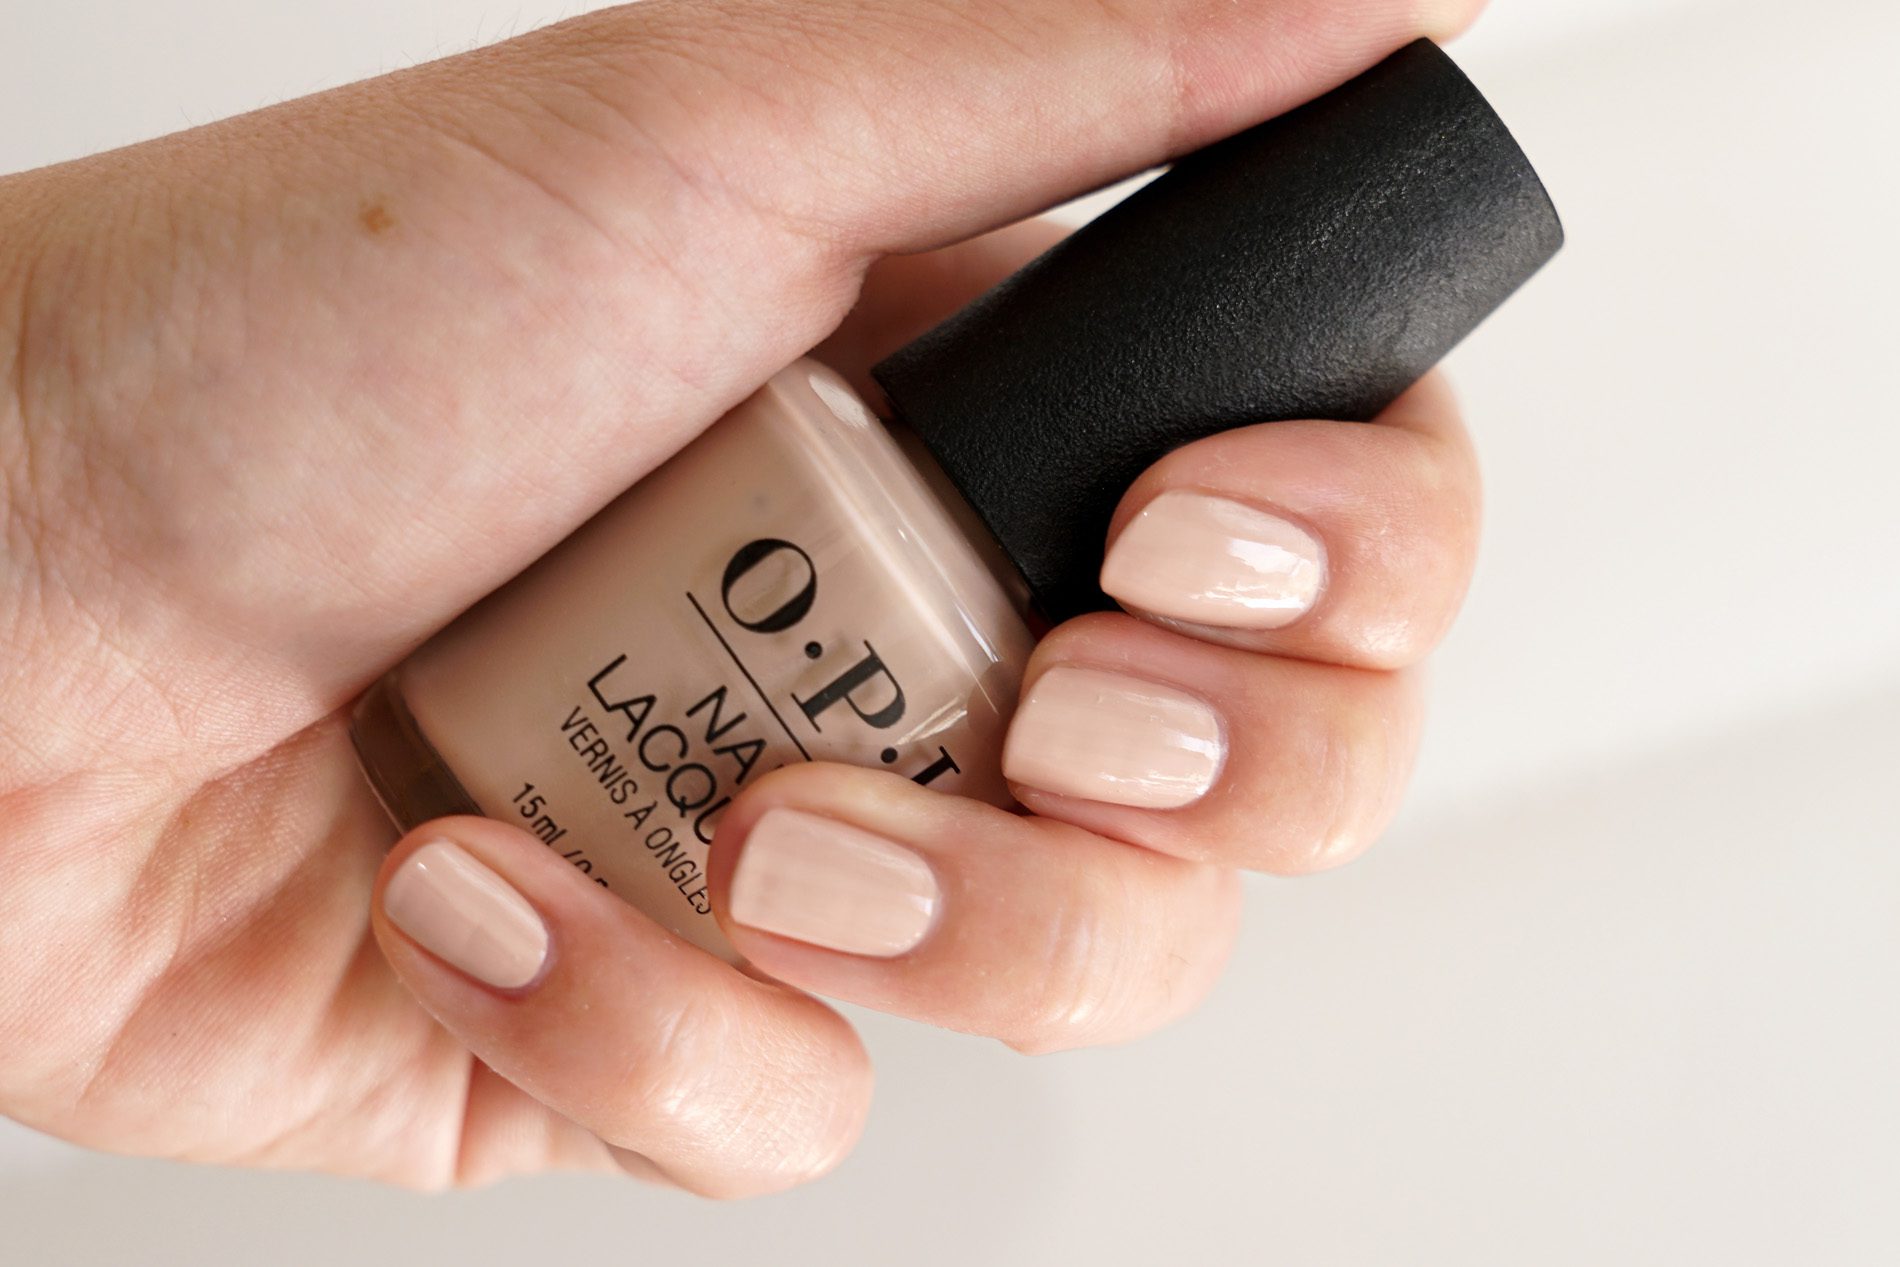 2. "Nude nail color for boudoir photography" - wide 3